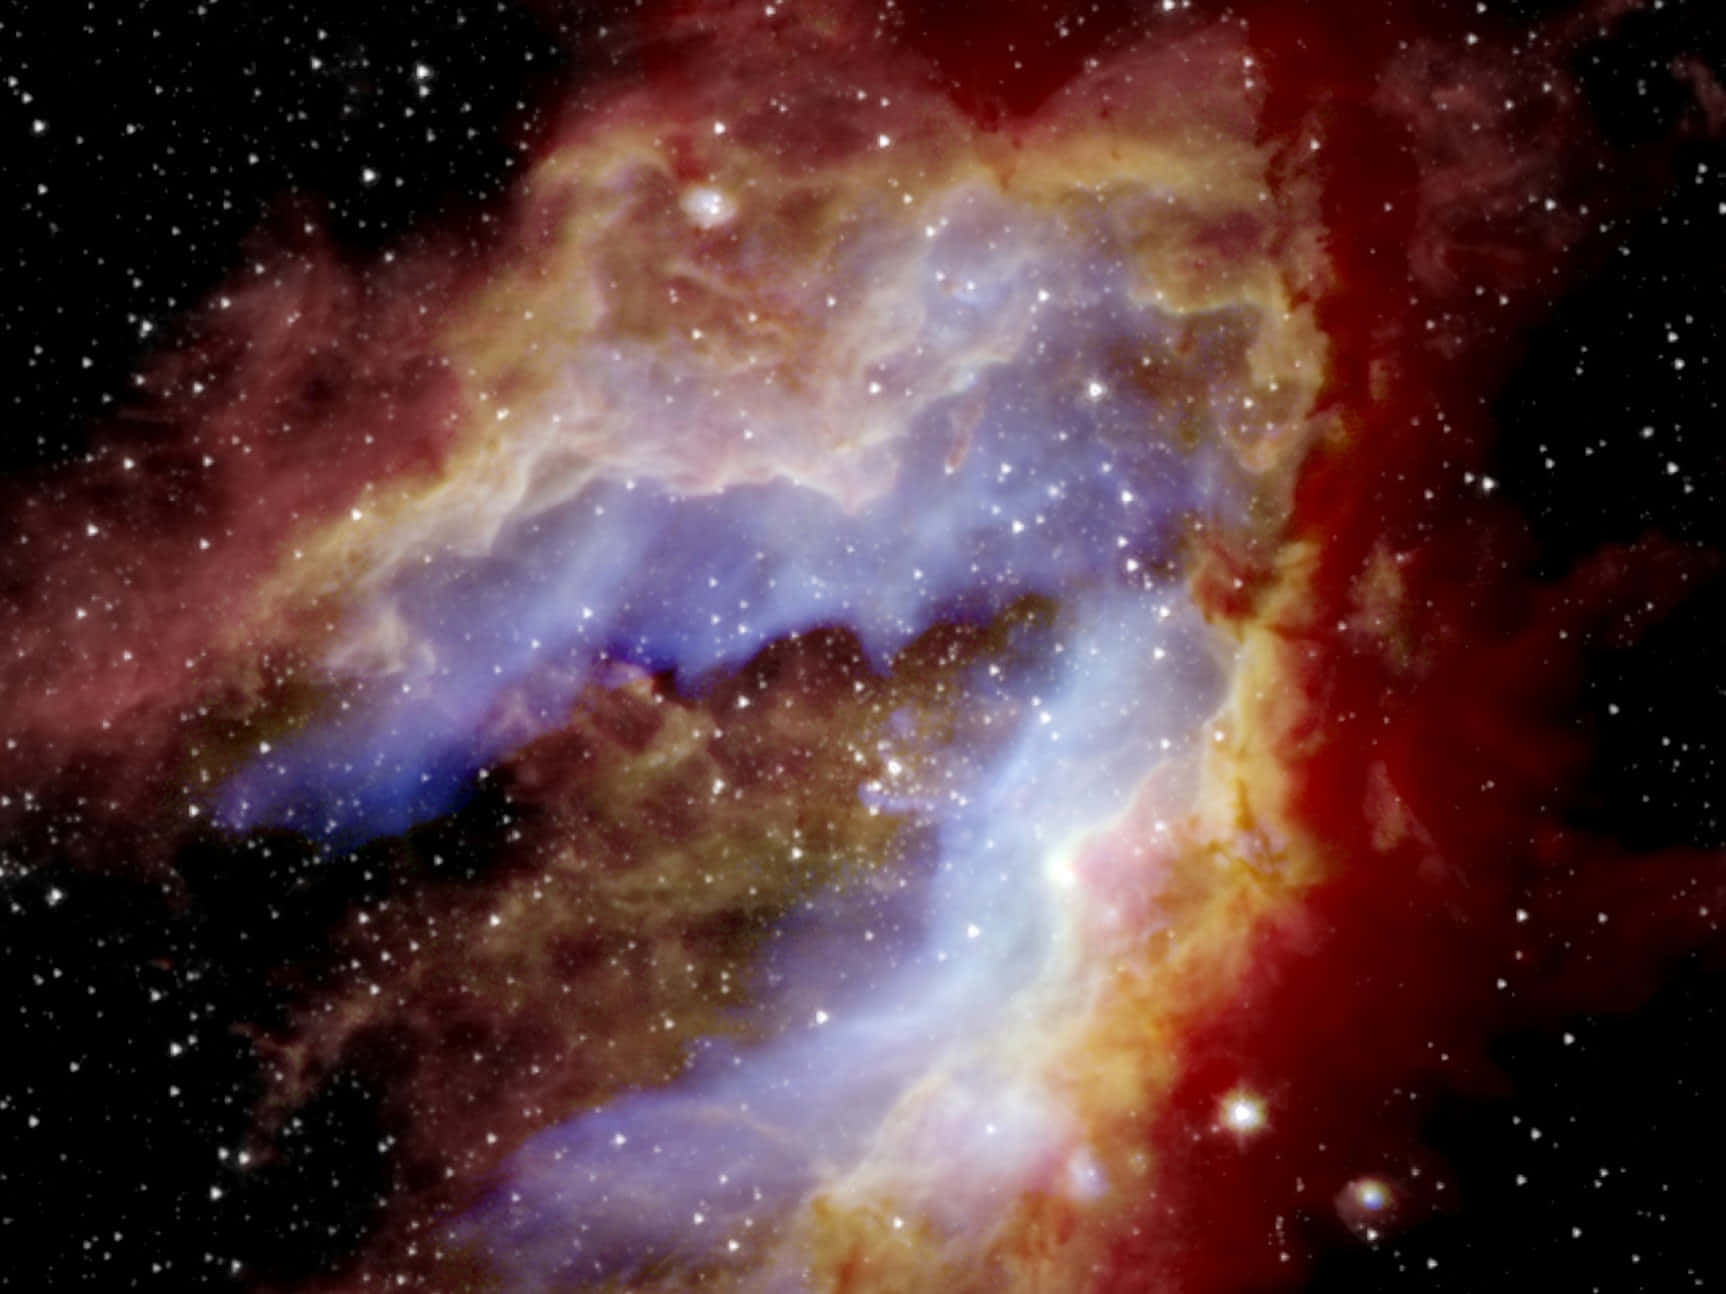 "A glorious Nebula, illuminating space in vibrant colors"